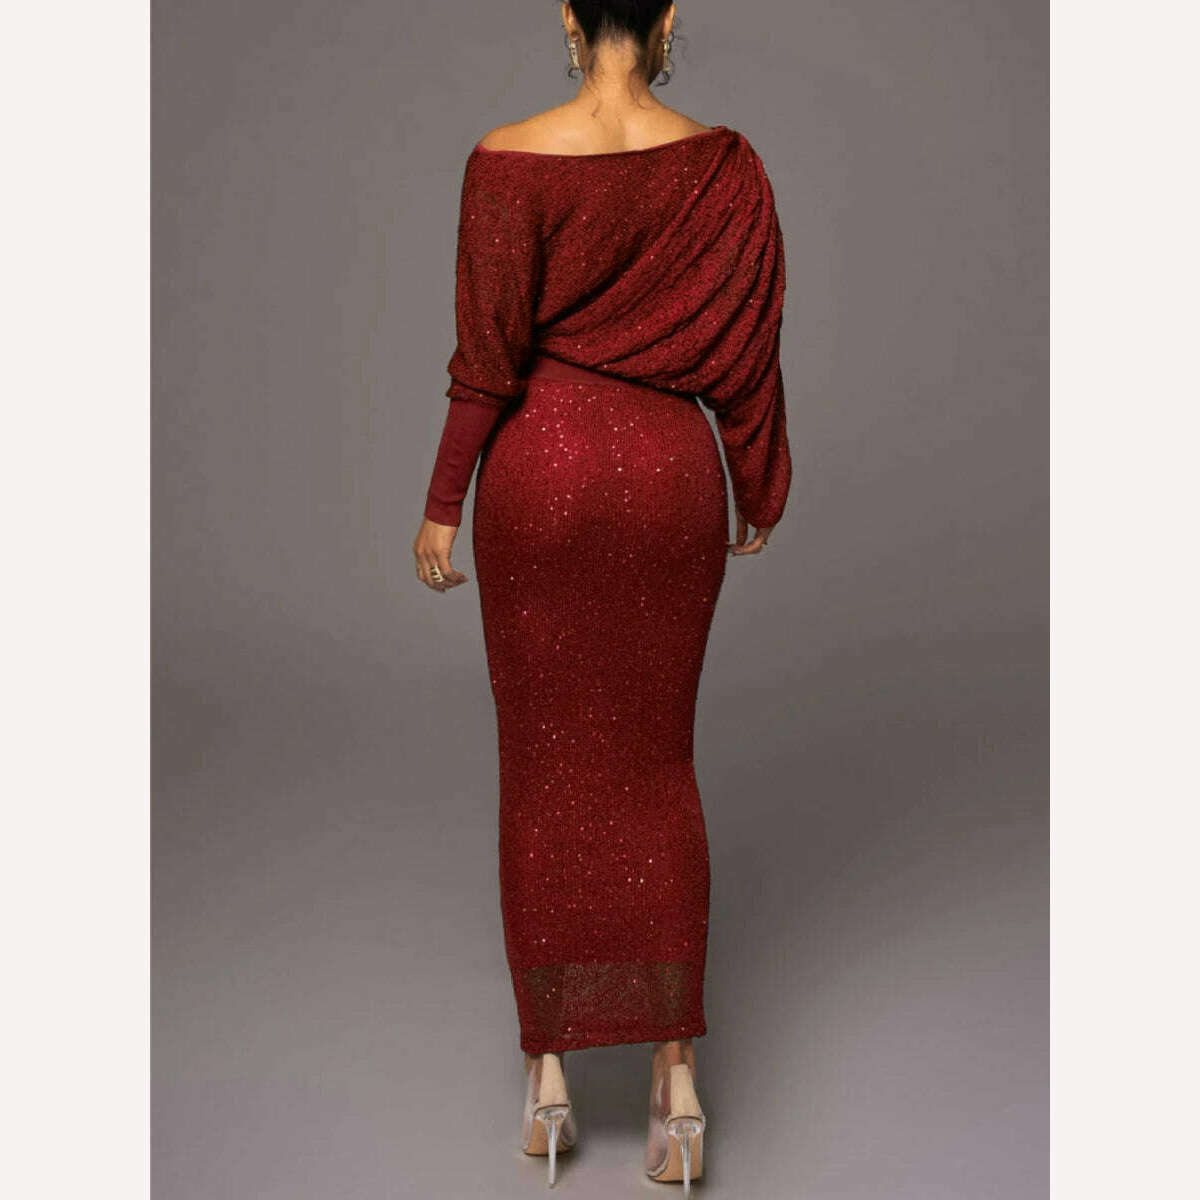 KIMLUD, Mikydely Autumn New Elegant Off The Shoulder Knitted  Dress Woman Long sleeve Festive Dress, KIMLUD Womens Clothes